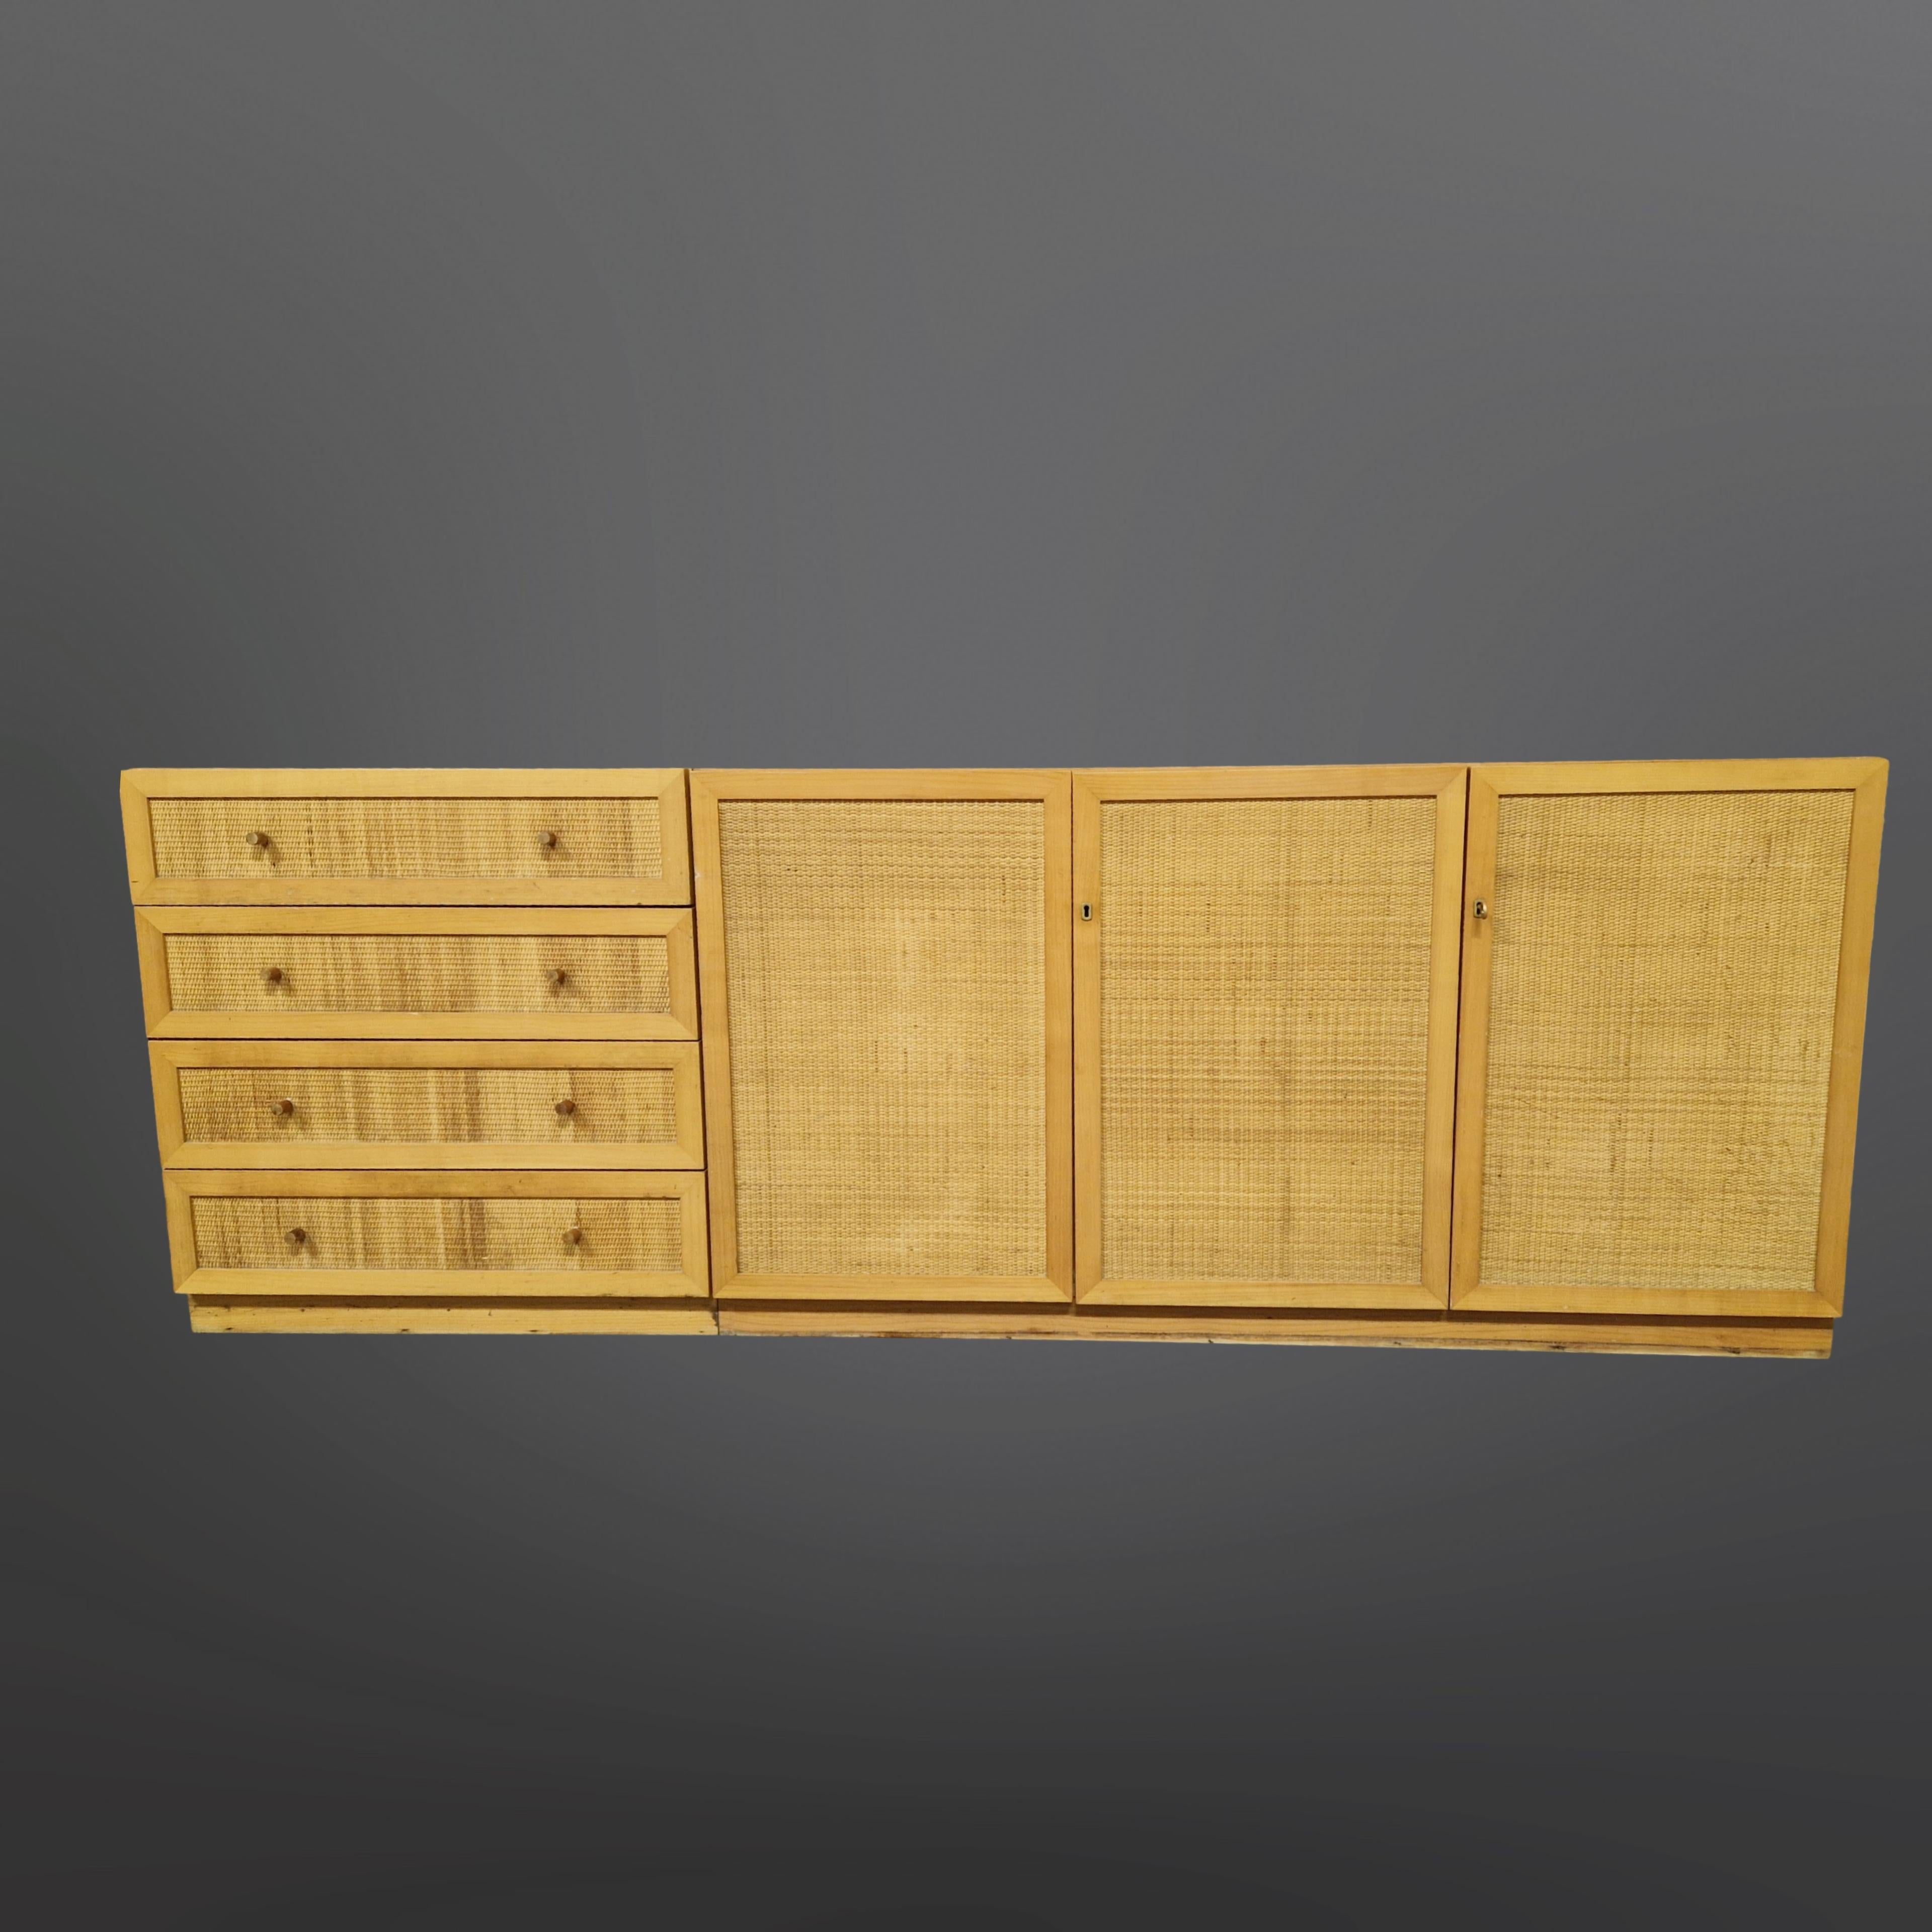 Modular light wood sideboard. It consists of 2 pieces that can be joined as one large sideboard or separately. They measure 75 and 150cm in width. One part with 4 drawers and one part with doors. Made from wood with rattan fronts on the doors and